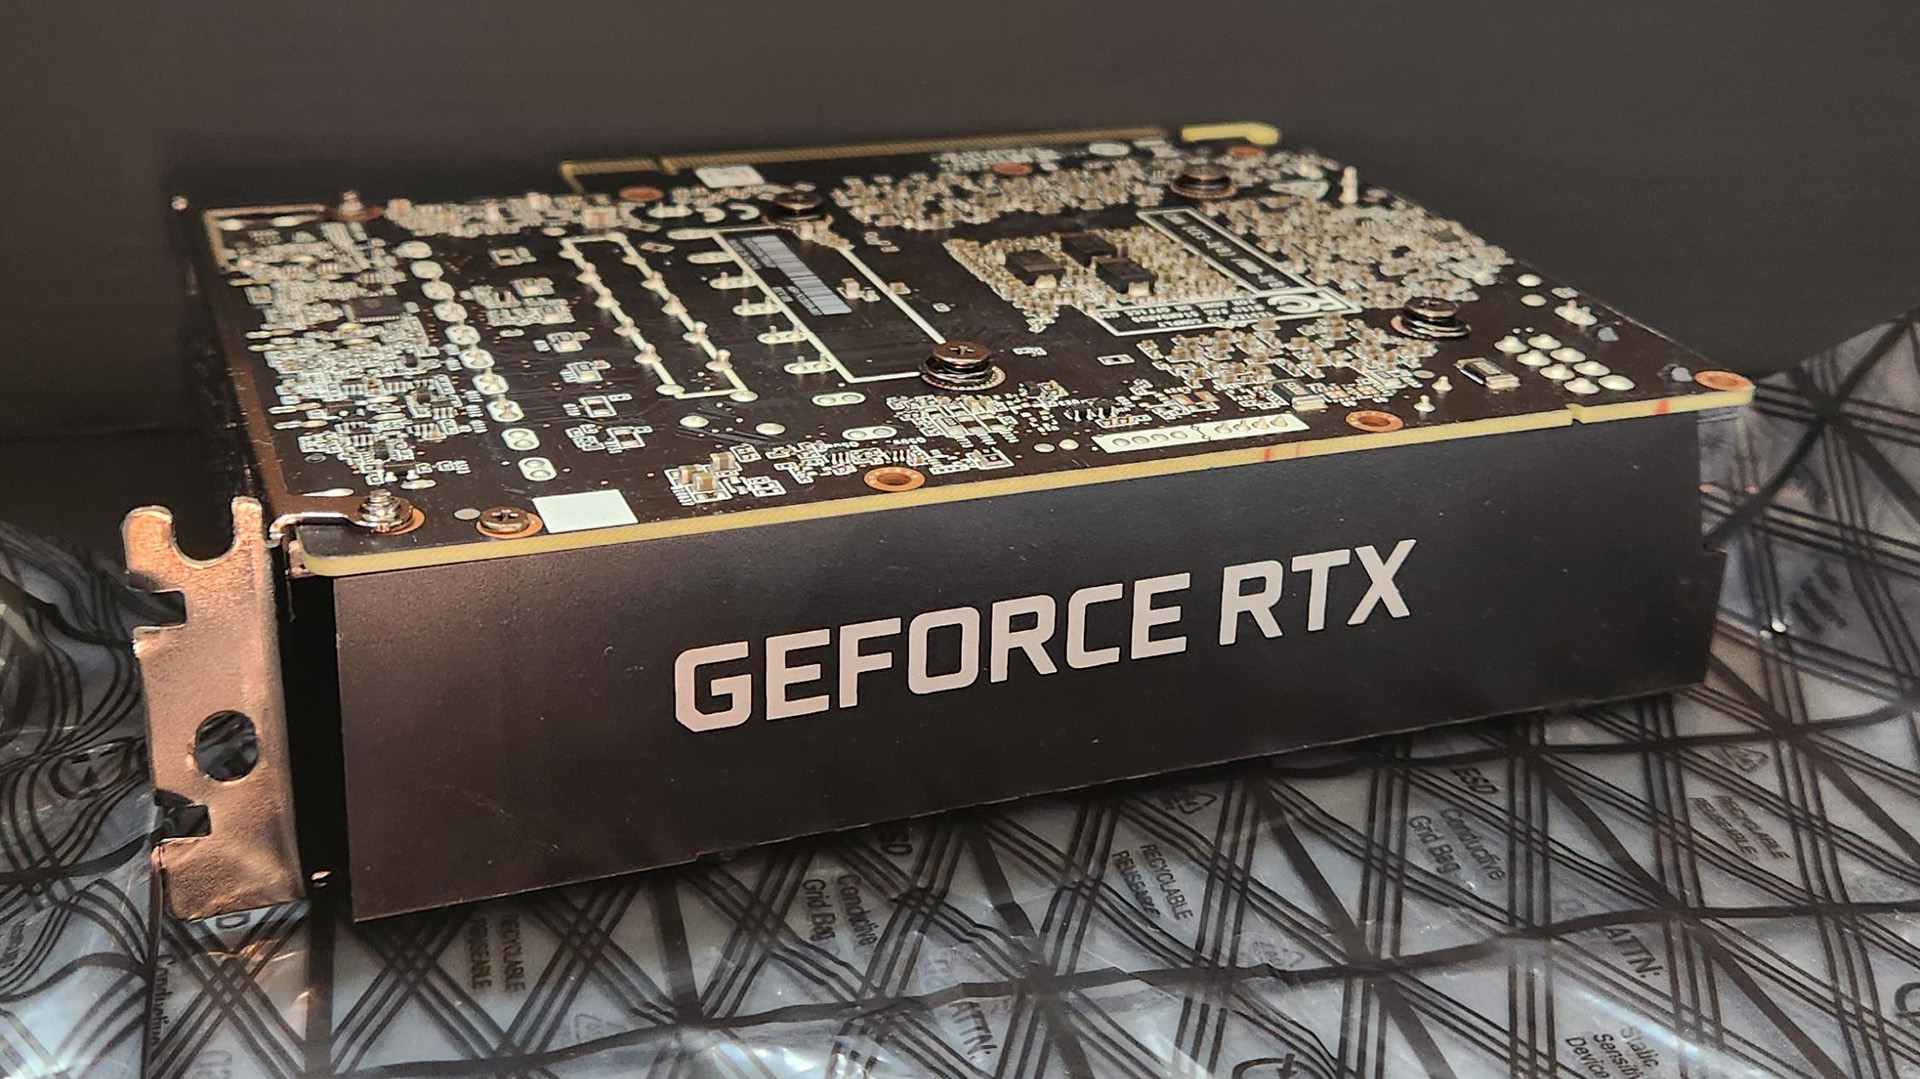 Customer RMAs Inno3D RTX 4070 Ti but allegedly receives cheaper Dell RTX 3050 in return — blames Overclockers UK for scam